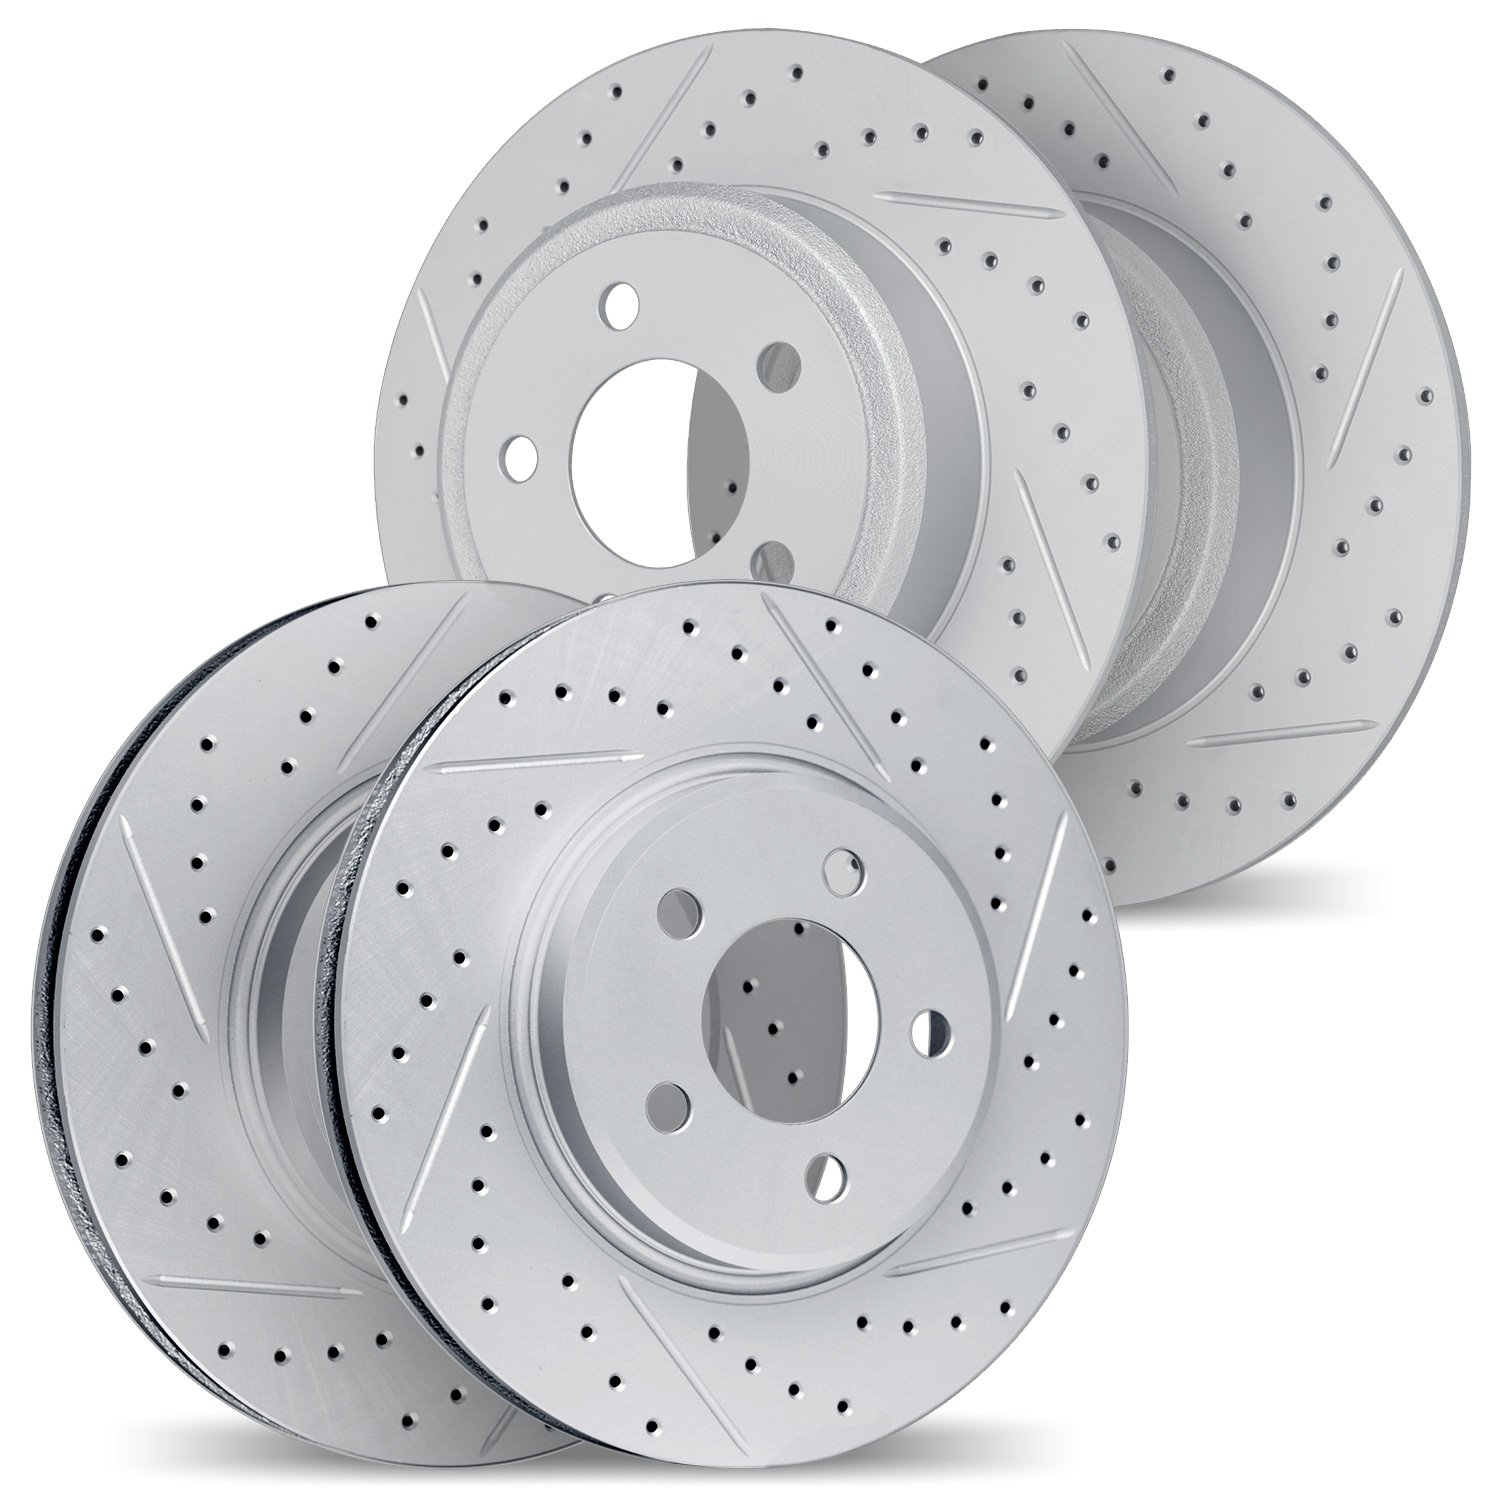 2004-76026 Geoperformance Drilled/Slotted Brake Rotors, 2008-2015 Lexus/Toyota/Scion, Position: Front and Rear